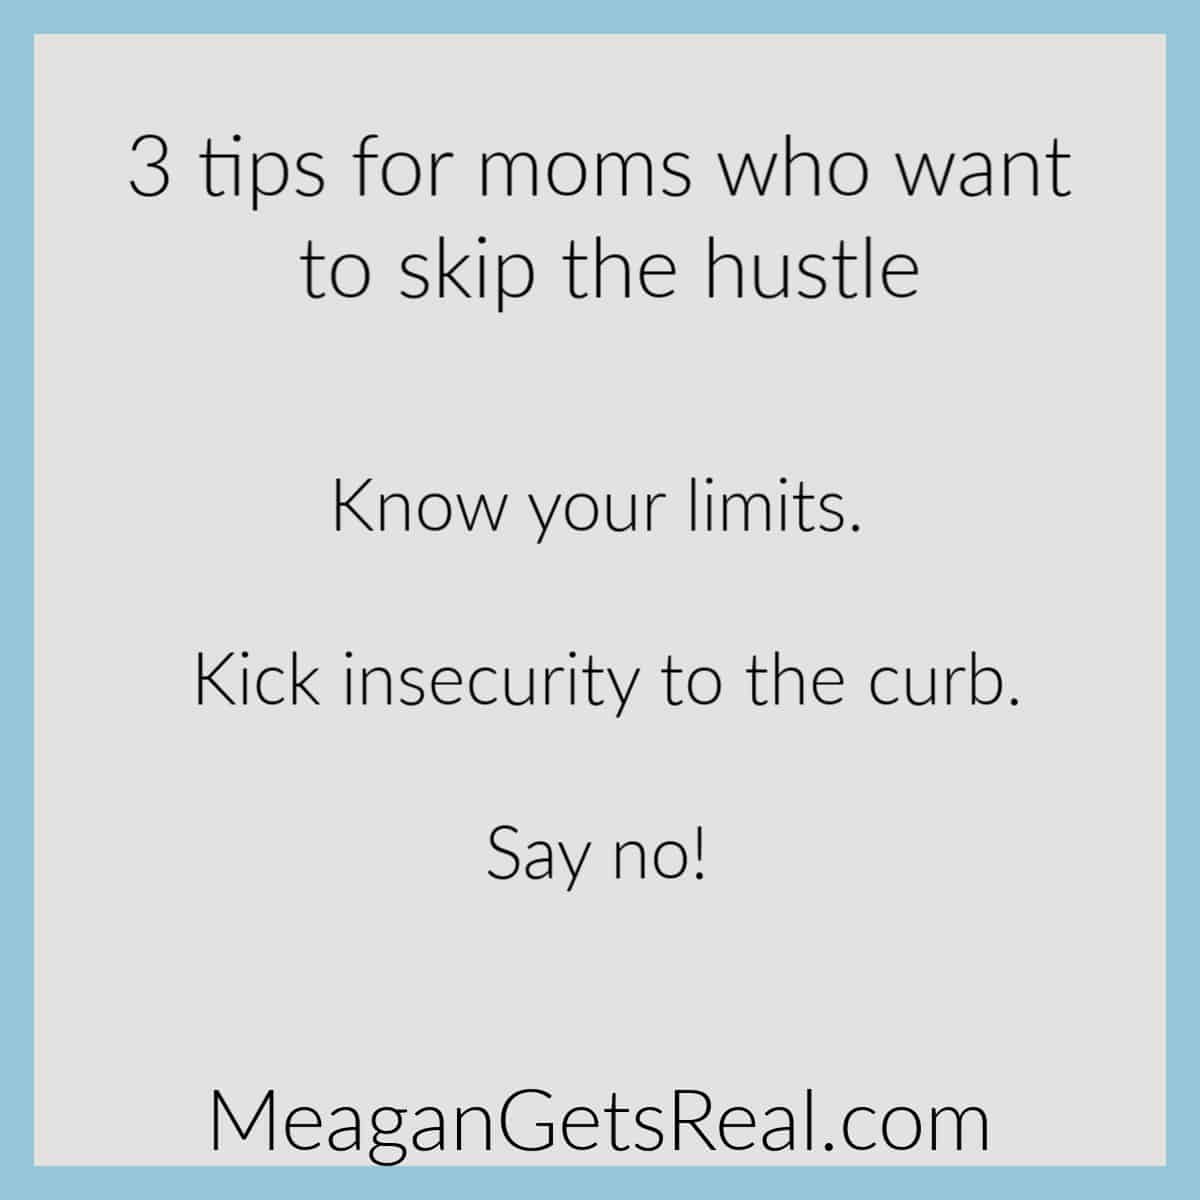 3 Tips for moms who want to skip the hustle. Support for moms doesn't have to be hard to find with this comprehensive guide filled with parenting resources for moms you won't want to miss.